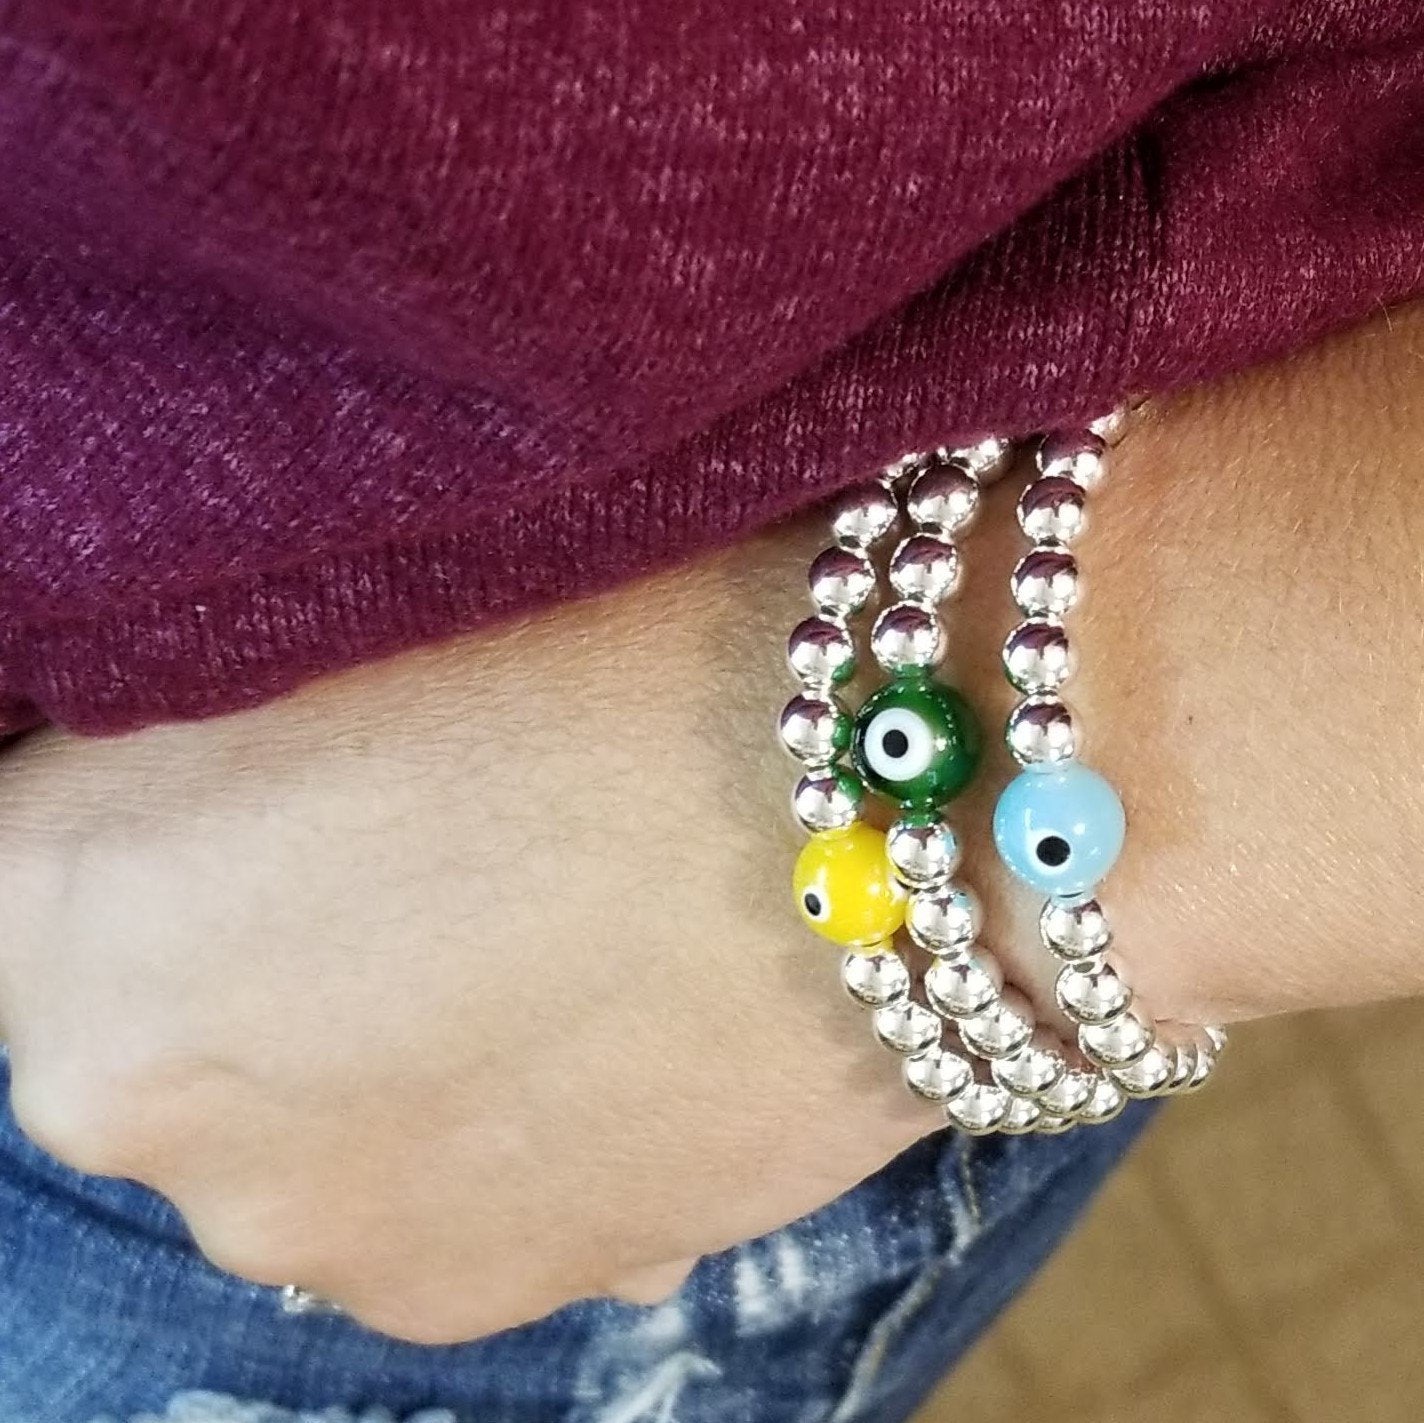 Colorful Evil Eye Bracelets for Your Arm To Wear Daily and Protect You - Alef Bet by Paula